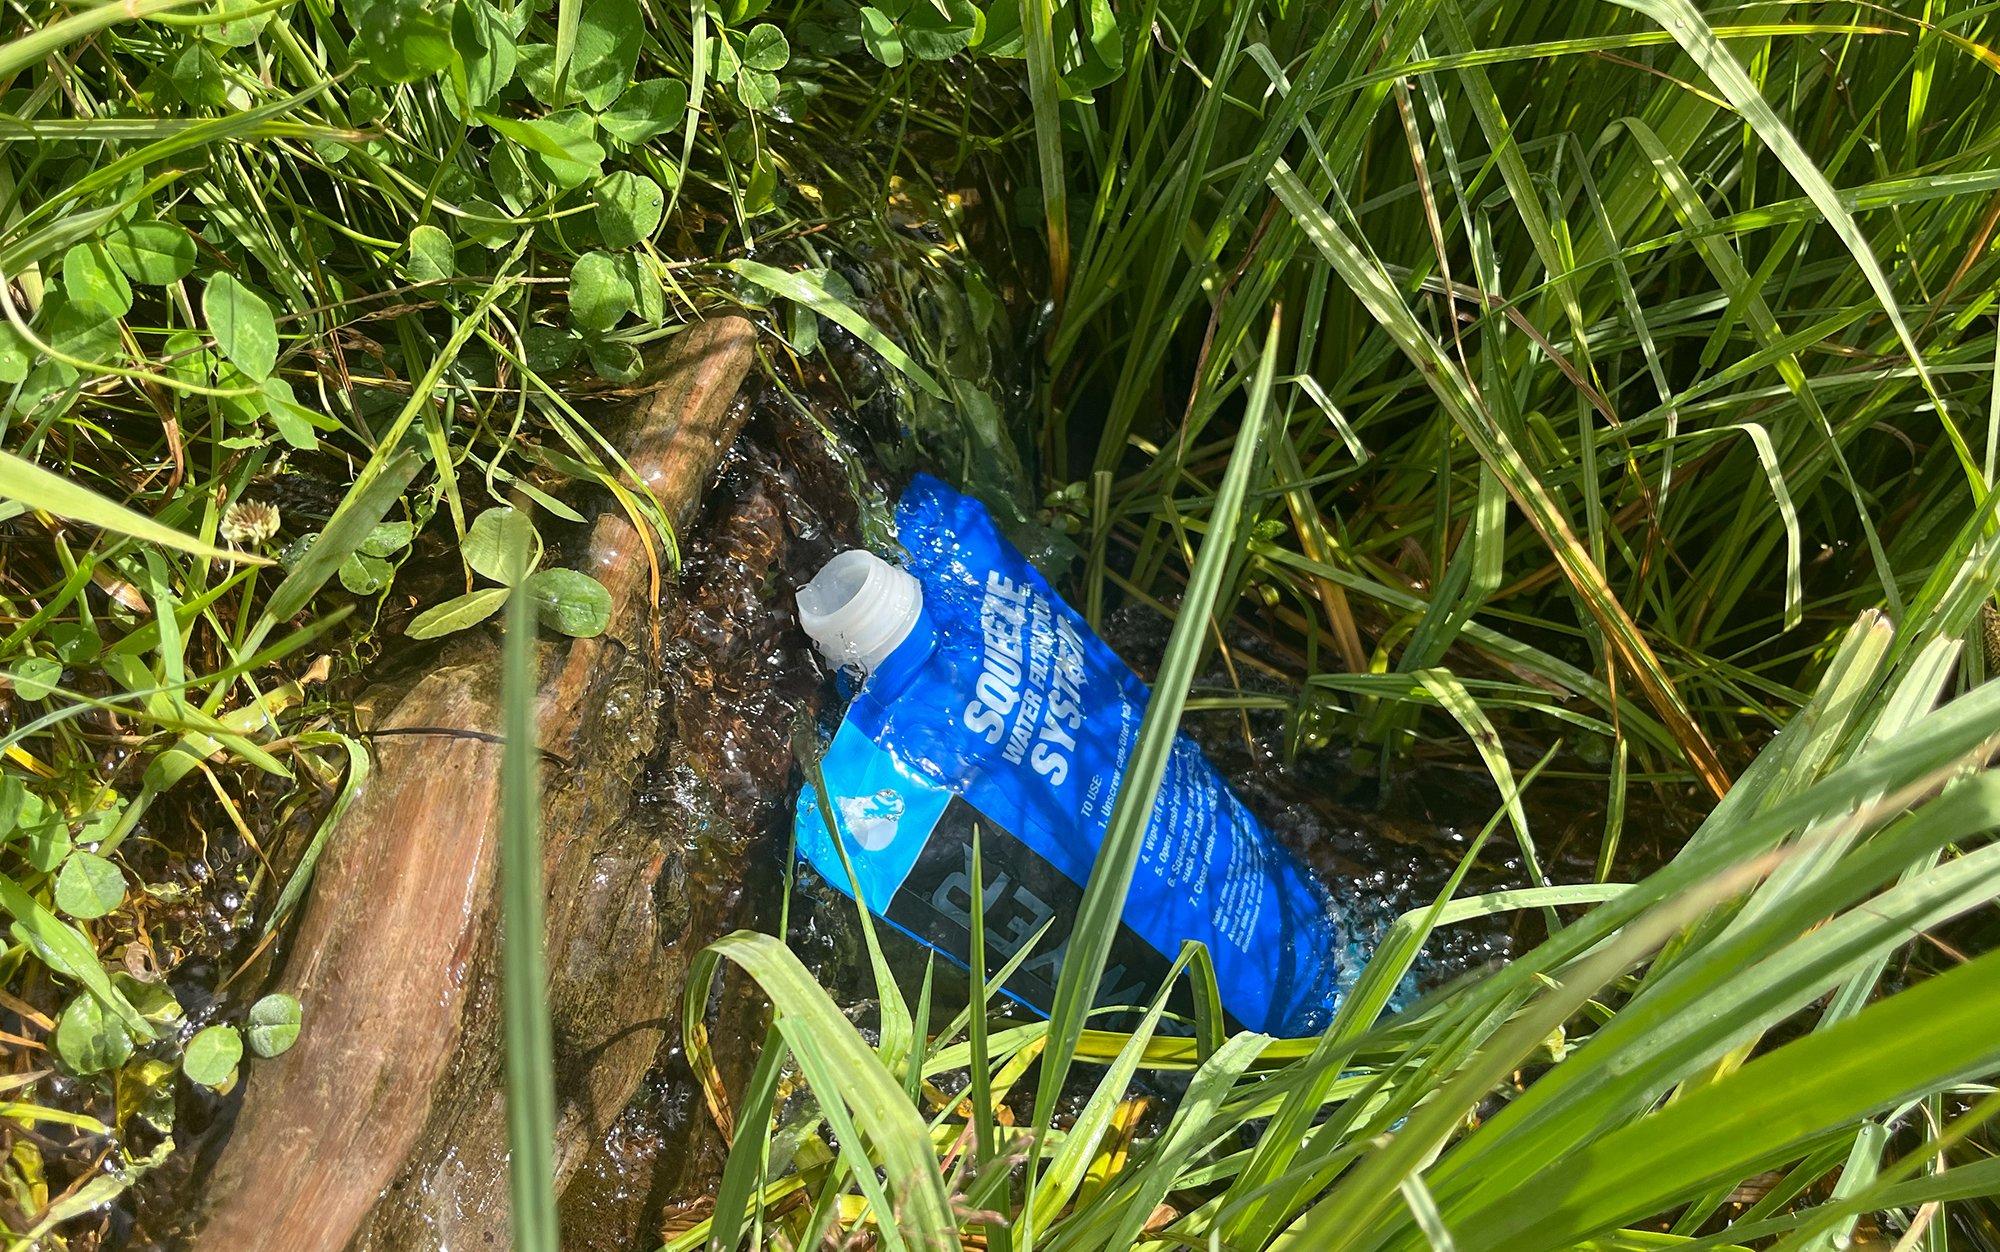 Filling up my water filter bag from a natural spring.